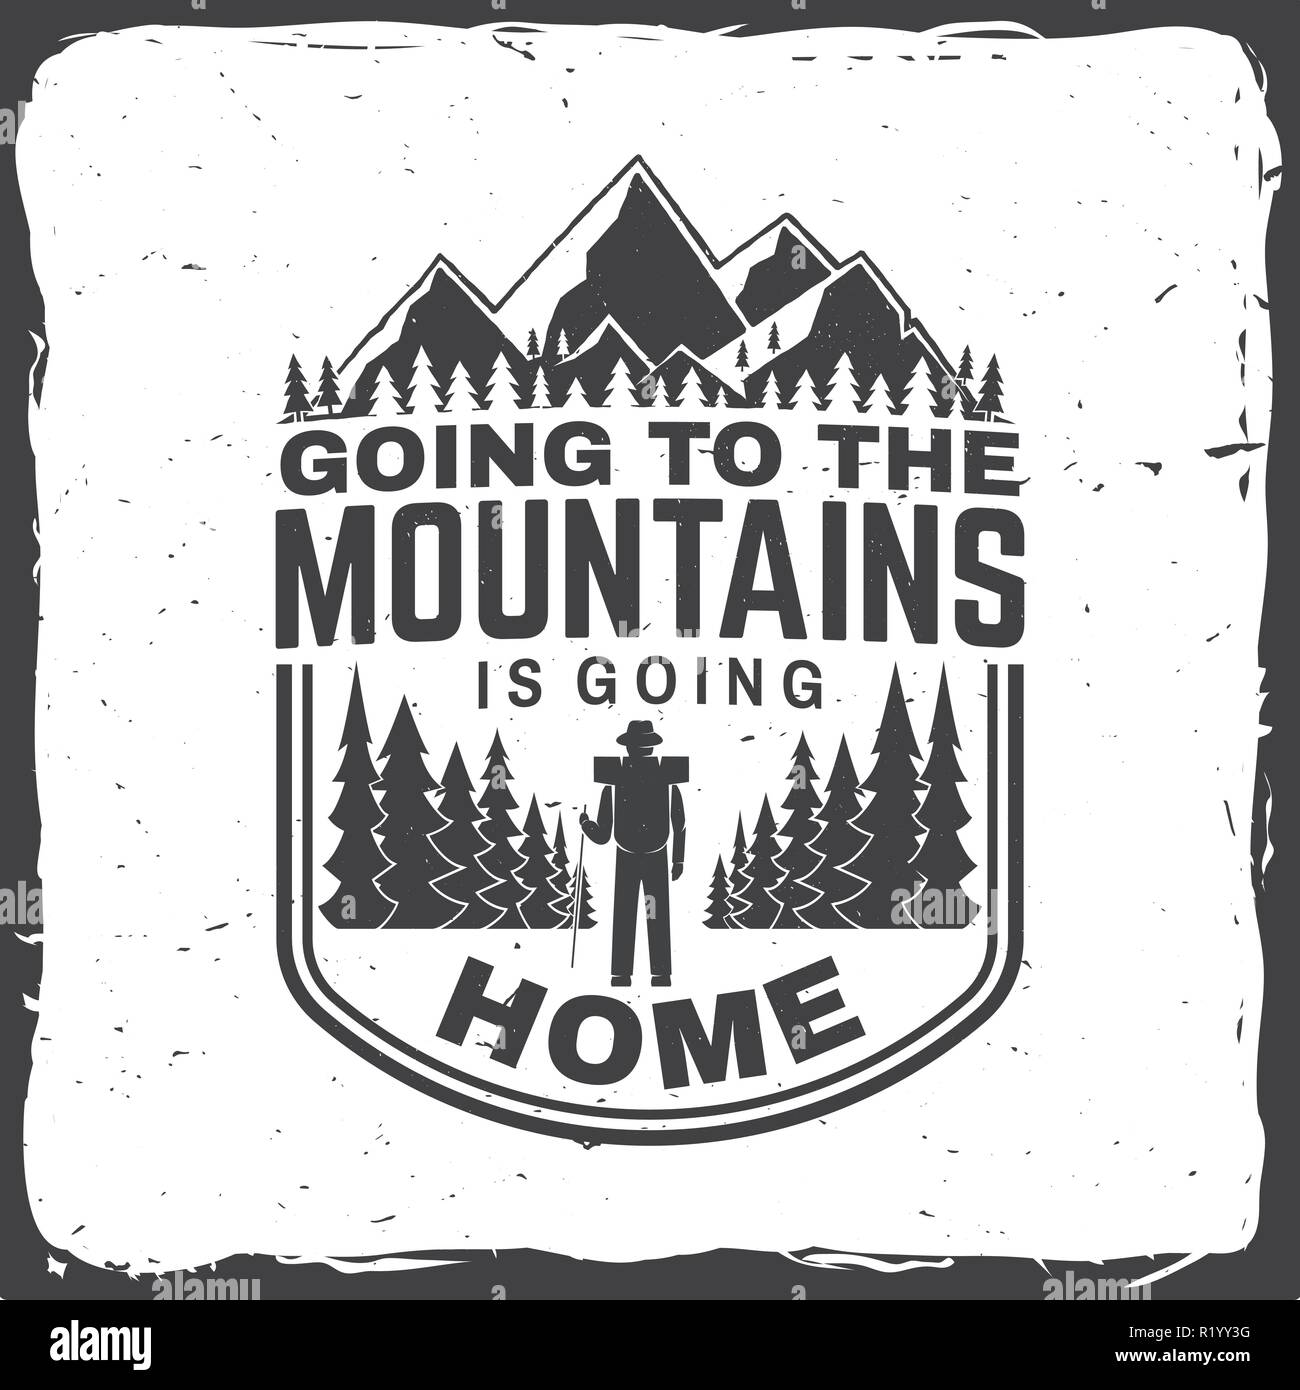 Going to the mountains is going home. Vector. Concept for shirt or badge, overlay, print, stamp or tee. Vintage typography design with hiker, mountains and forest silhouette. Outdoor adventure symbol Stock Vector